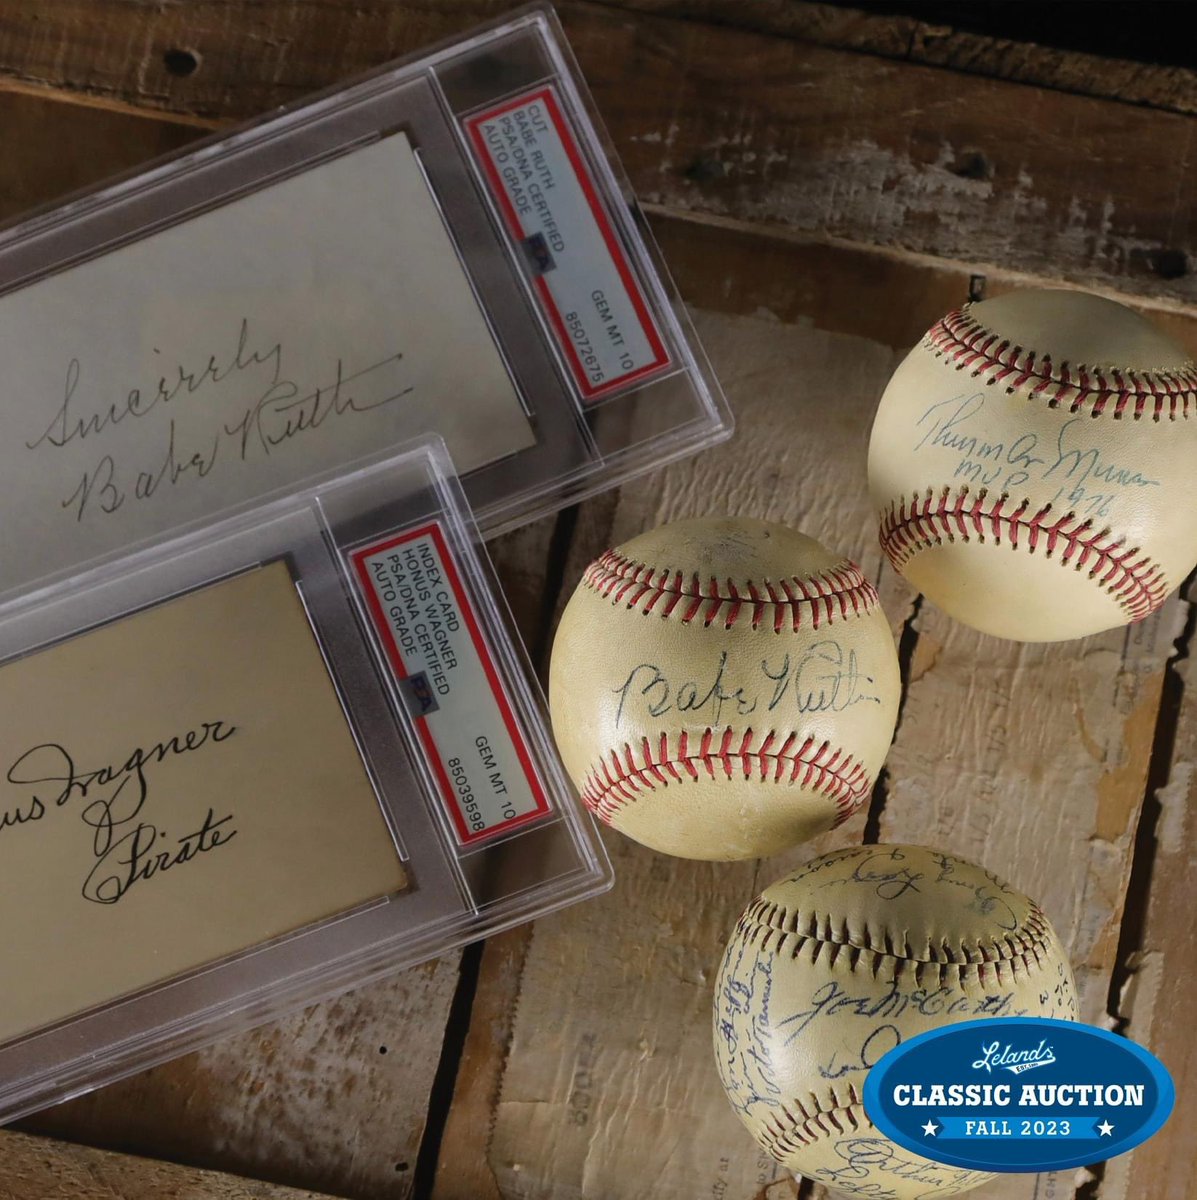 Legendary Signatures up for Grabs! Discover a treasure trove of history, with lots featuring legendary figures like the Yankees, Ruth, Wagner, and Munson, now available for bidding in the Lelands Fall Classic Auction. lelands.com The Classic Ends Nov 18 at 10 PM ET